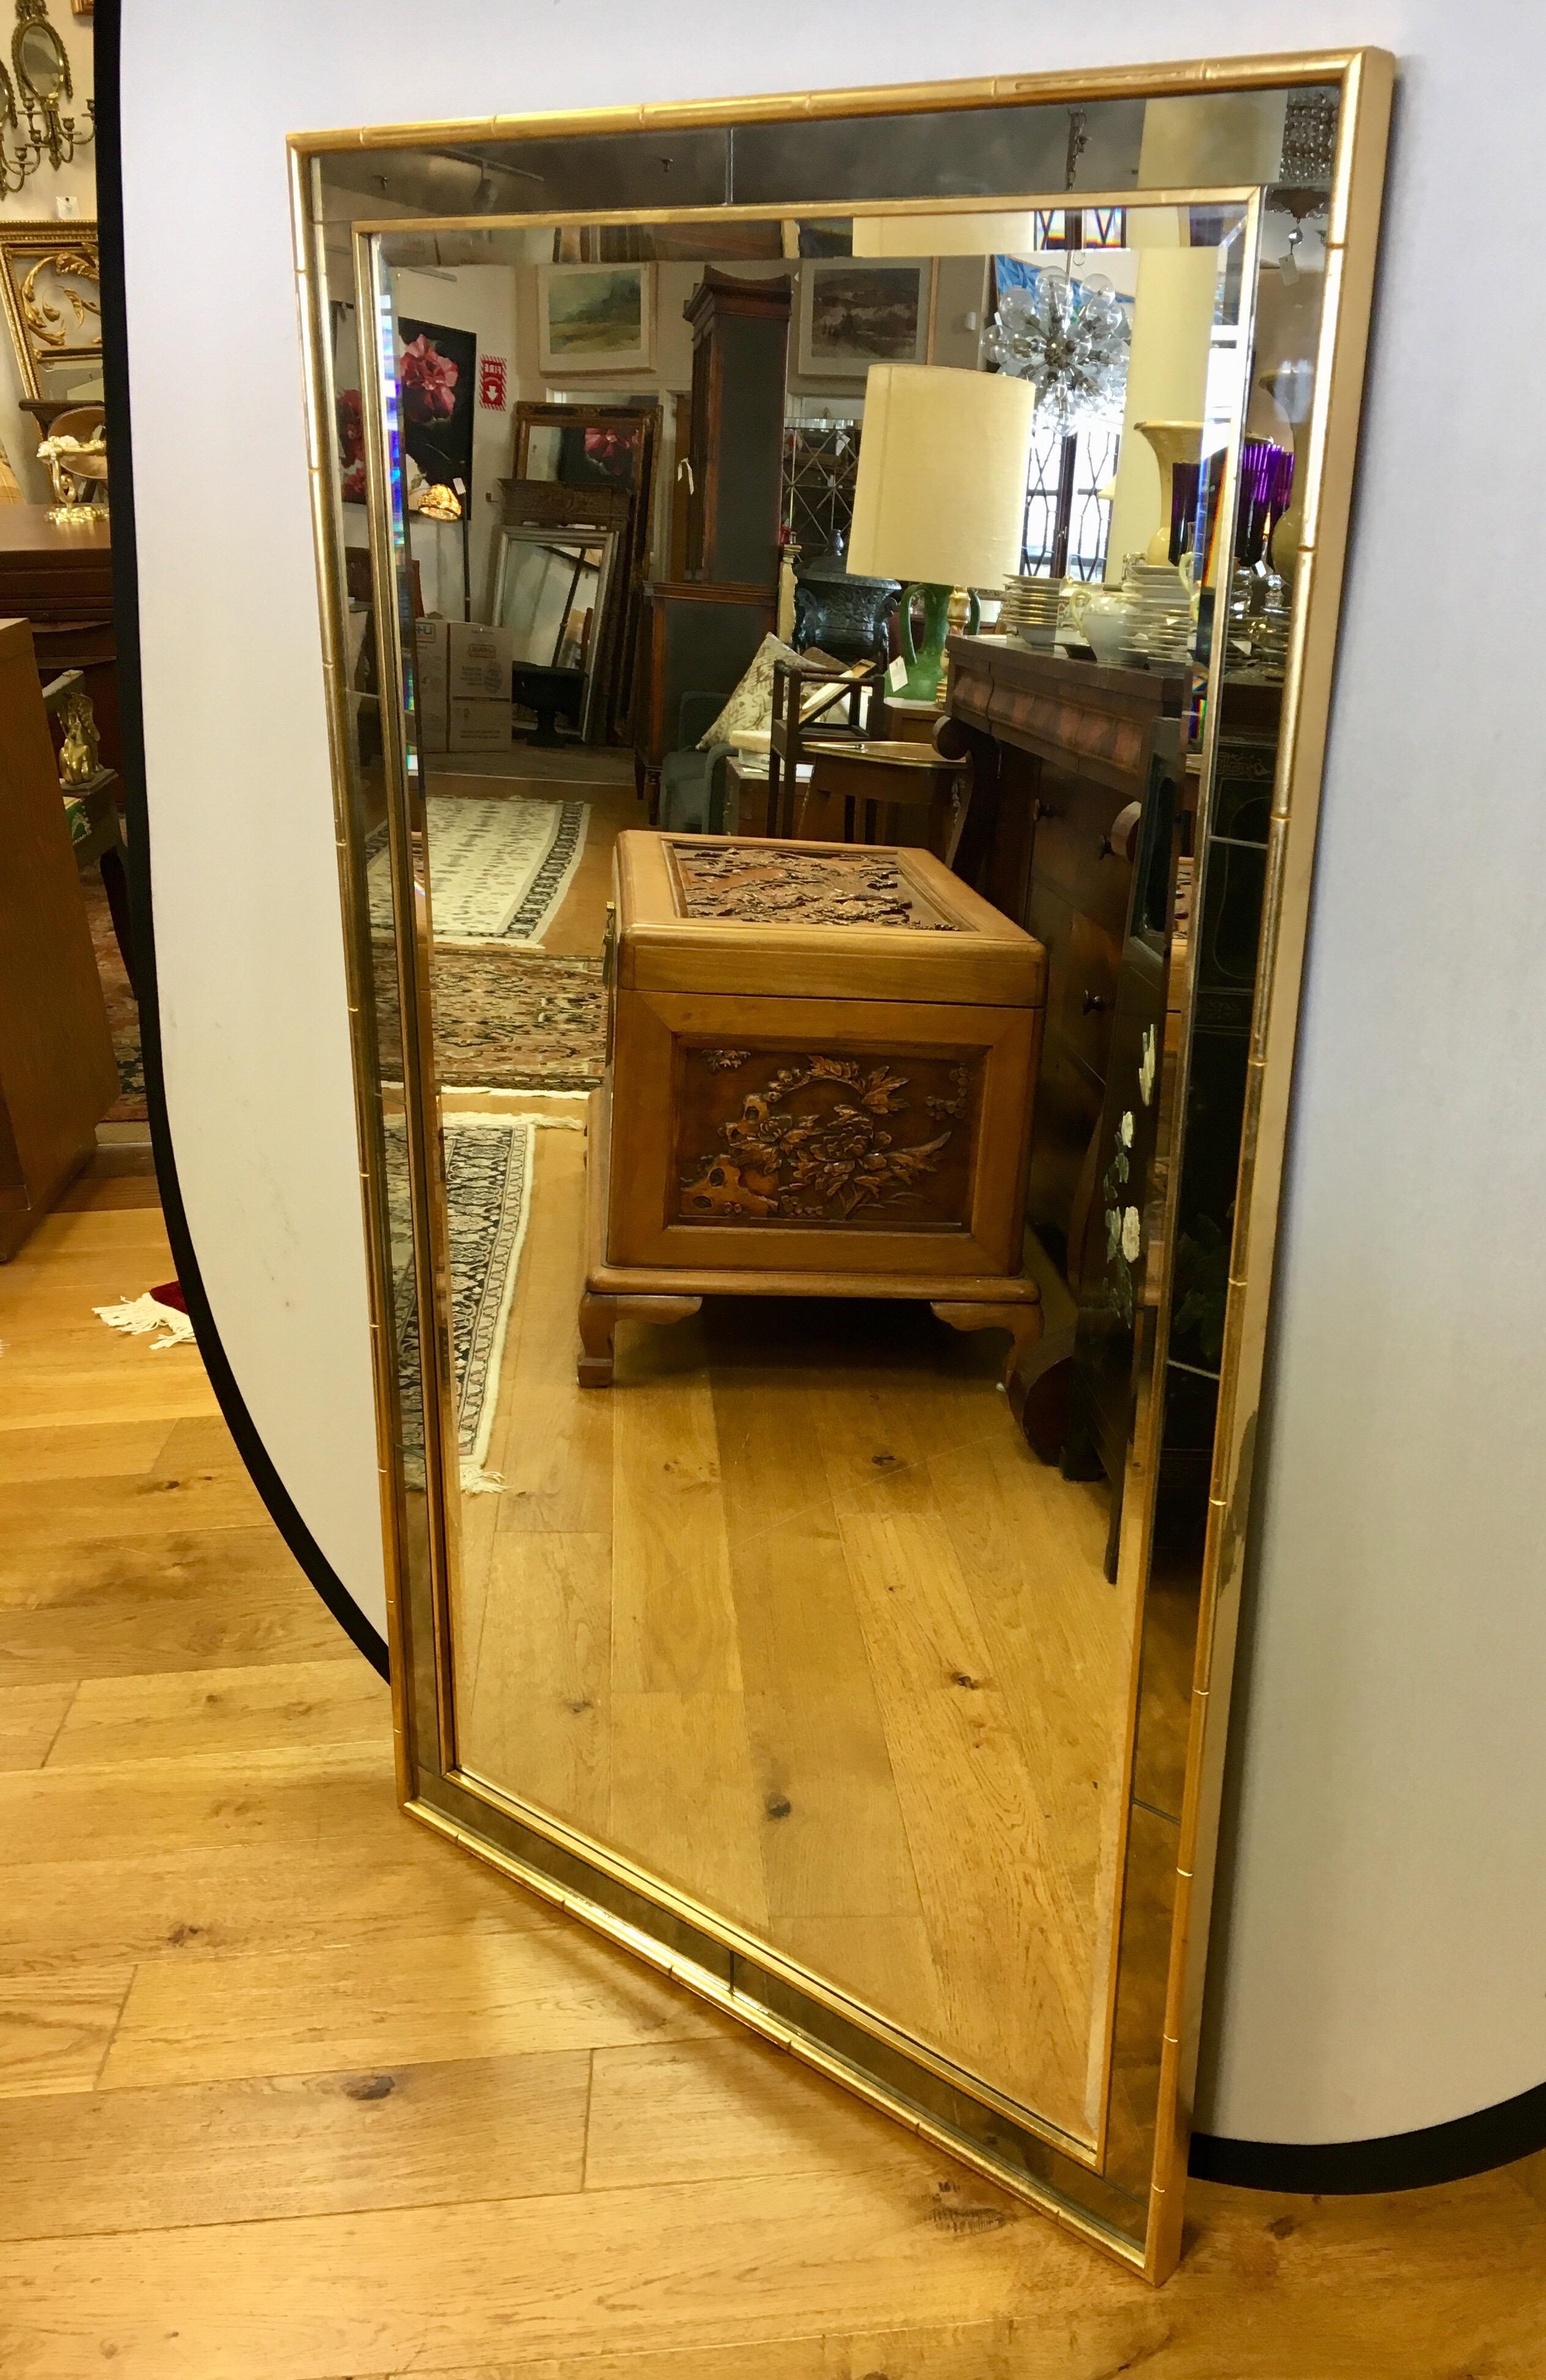 Rare and distinctive, this Labarge mirror has a gold faux bamboo frame with a bevelled mirror surrounded by a smoked mirrored mosaic border. It can be hung vertically or horizontally and is hallmarked in the back.